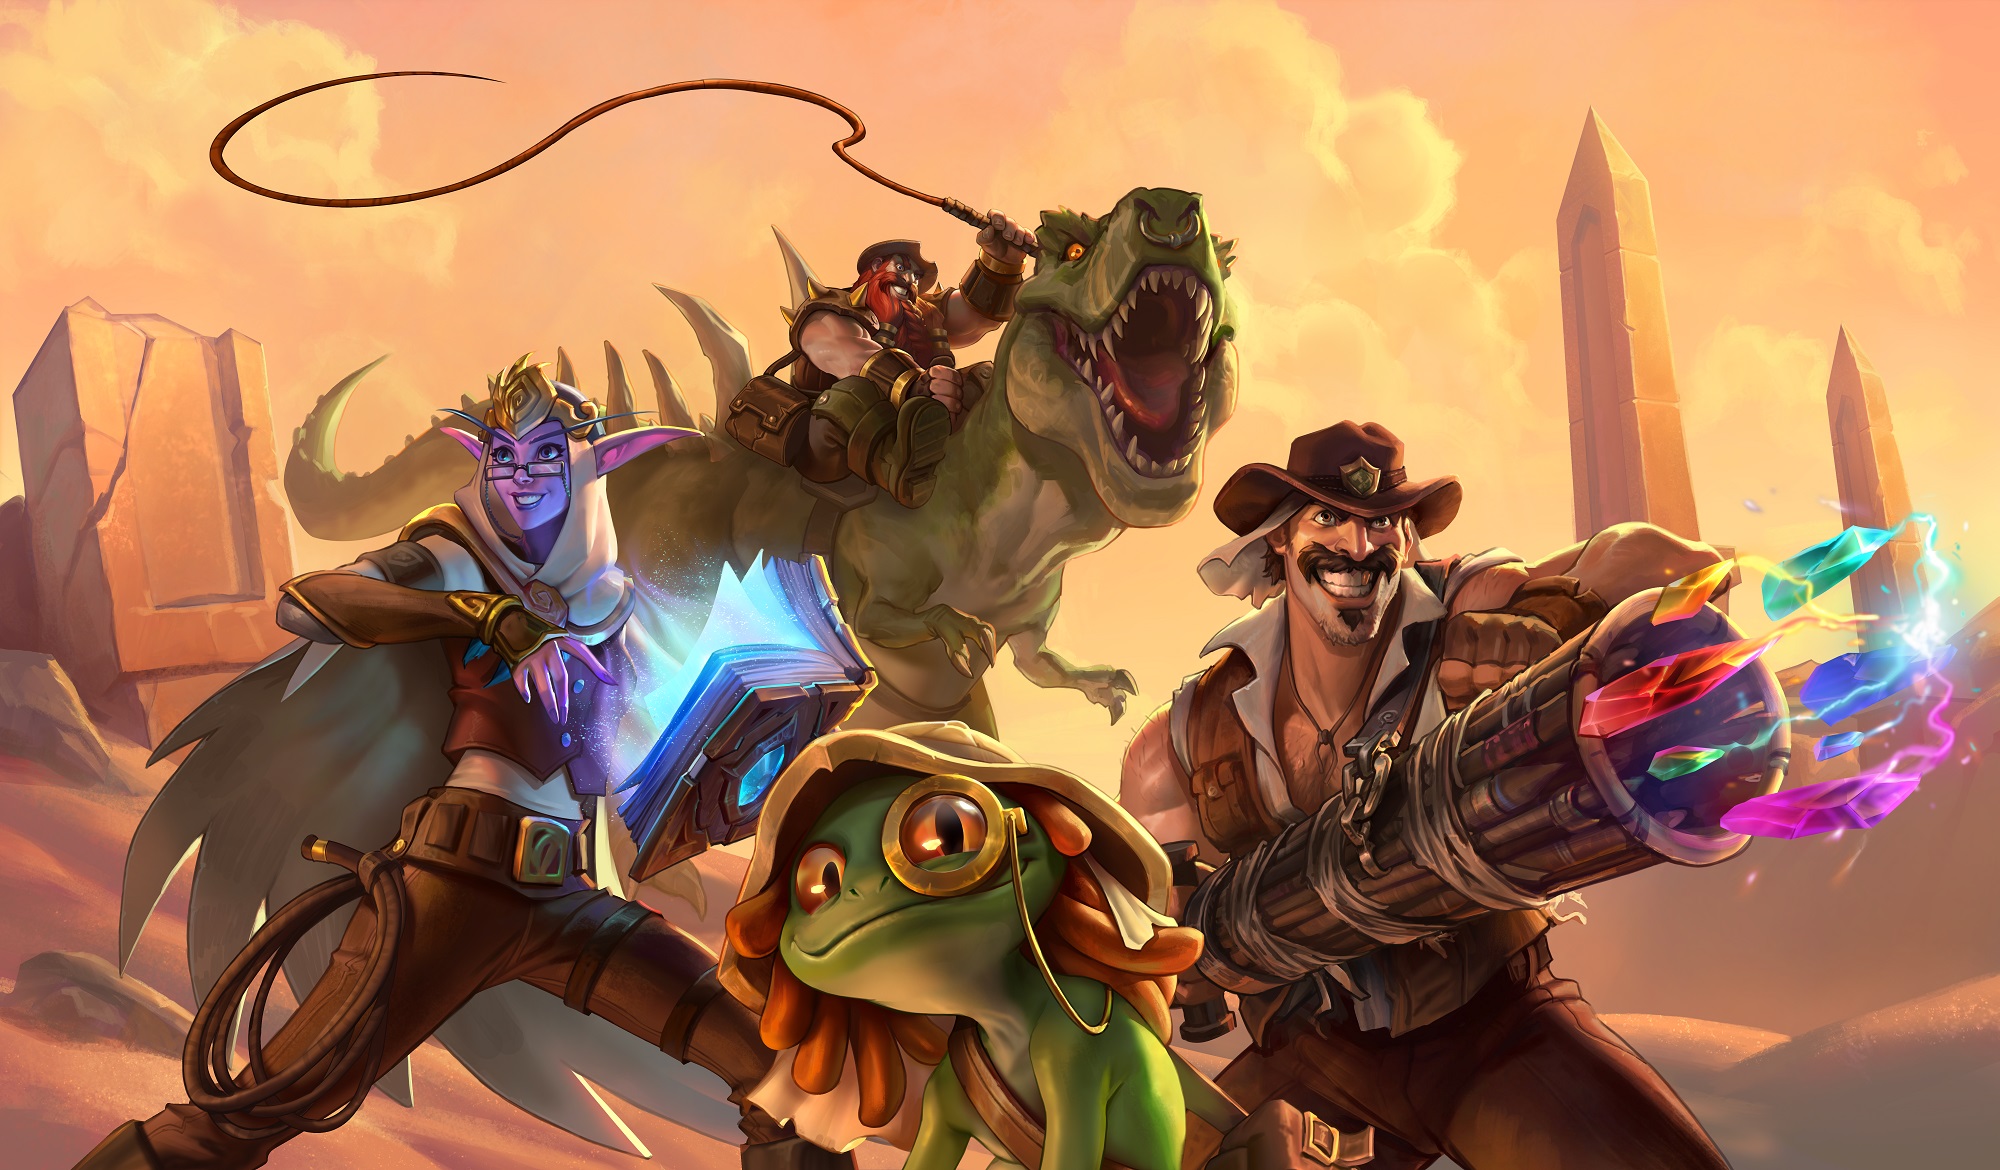 Saviors of Uldum, Hearthstone’s Next Expansion Will Be Launched In August